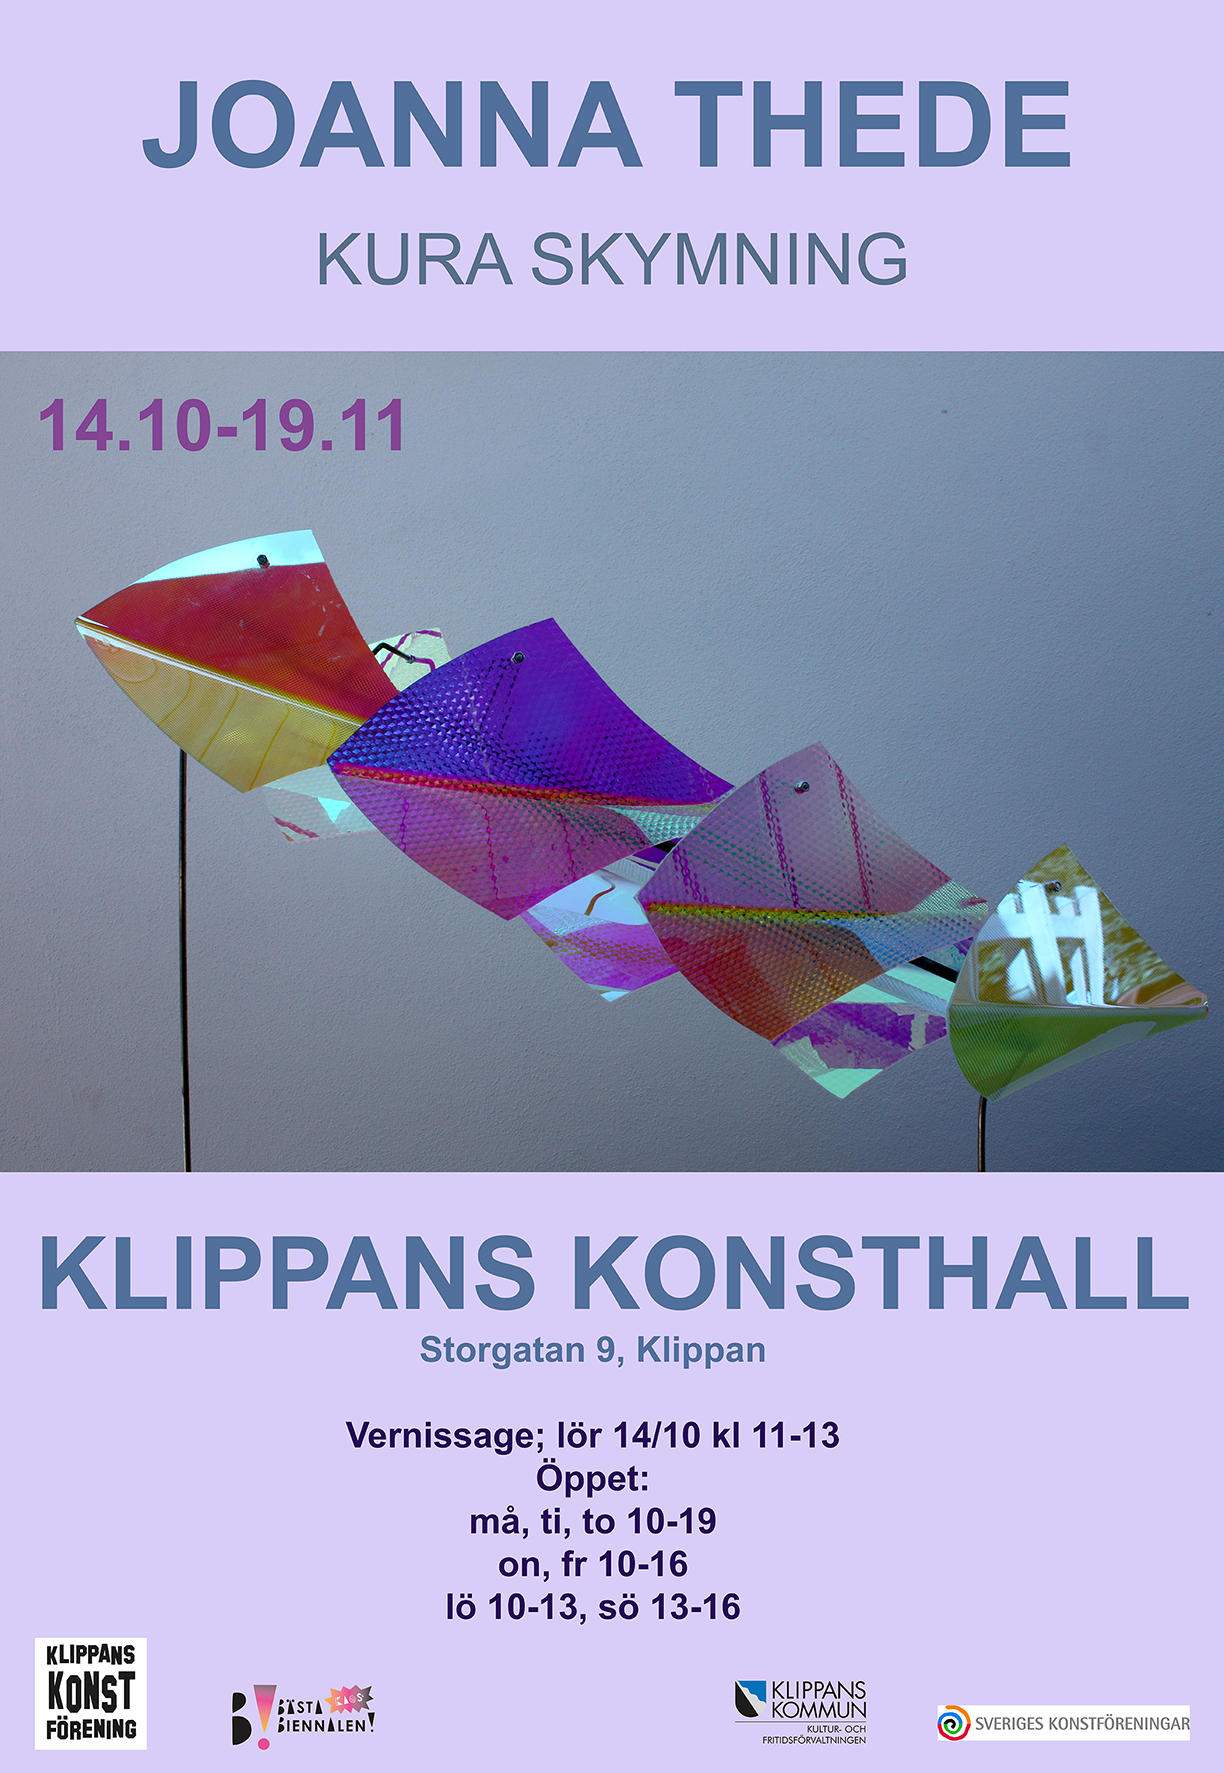 Joanna Thede opening Klippans konsthall 2017